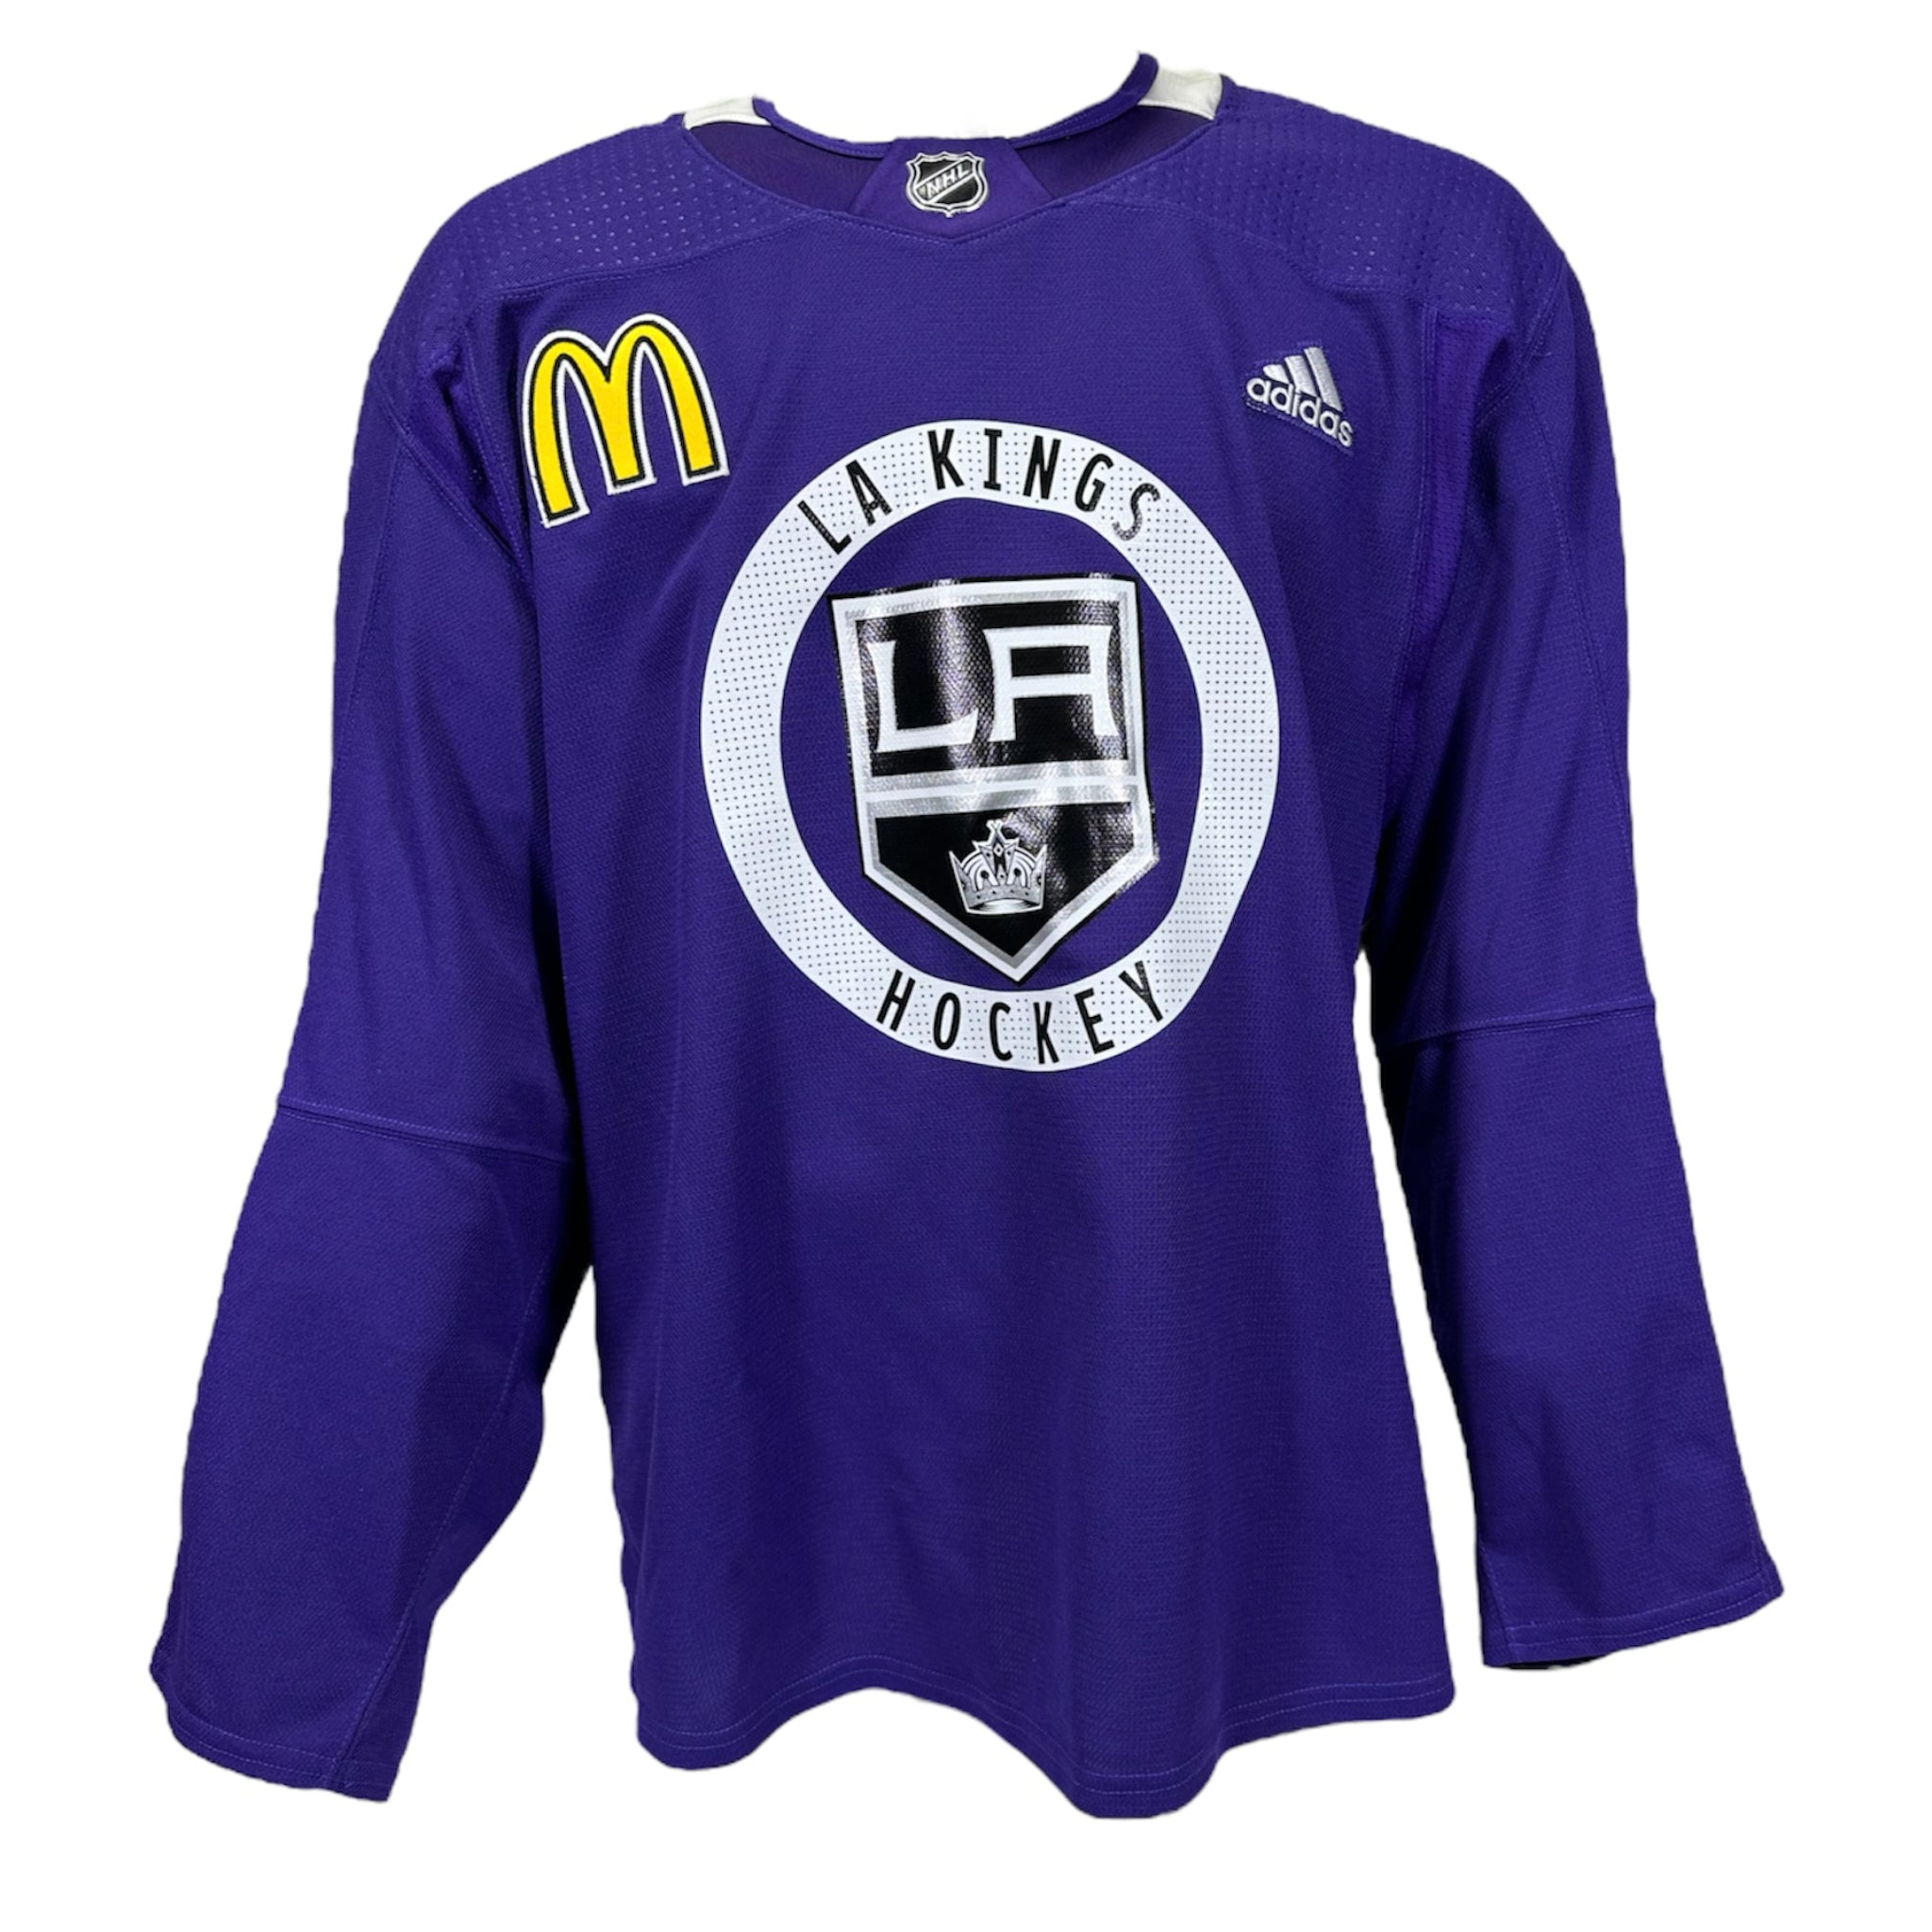 What company will get their logo on LA Kings jerseys?